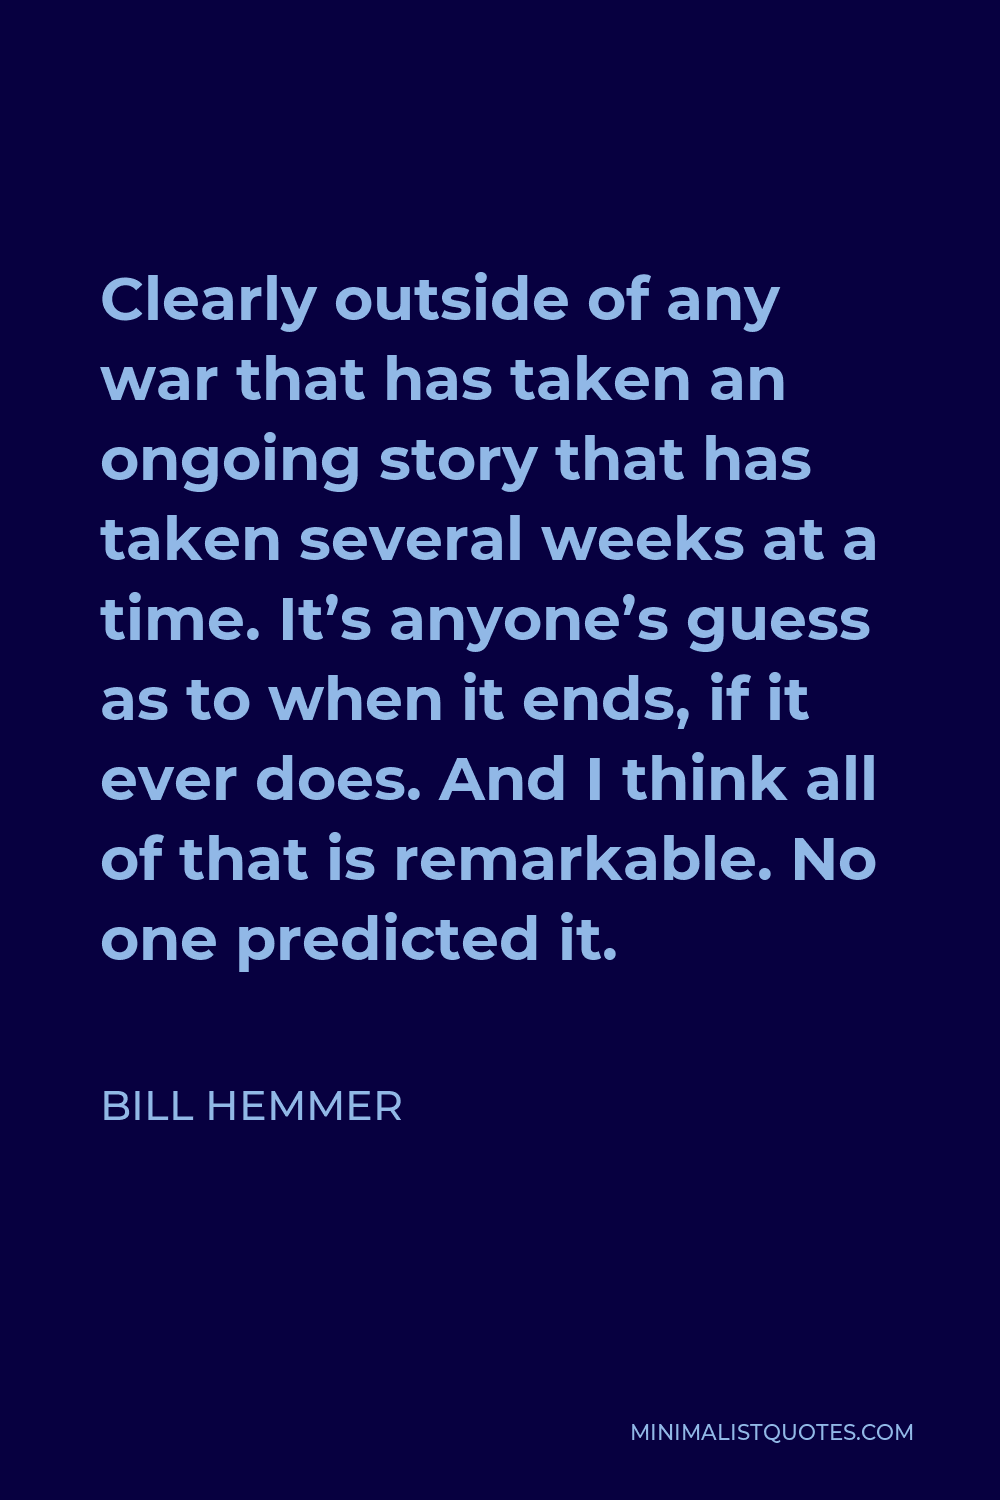 Bill Hemmer Quote - Clearly outside of any war that has taken an ongoing story that has taken several weeks at a time. It’s anyone’s guess as to when it ends, if it ever does. And I think all of that is remarkable. No one predicted it.